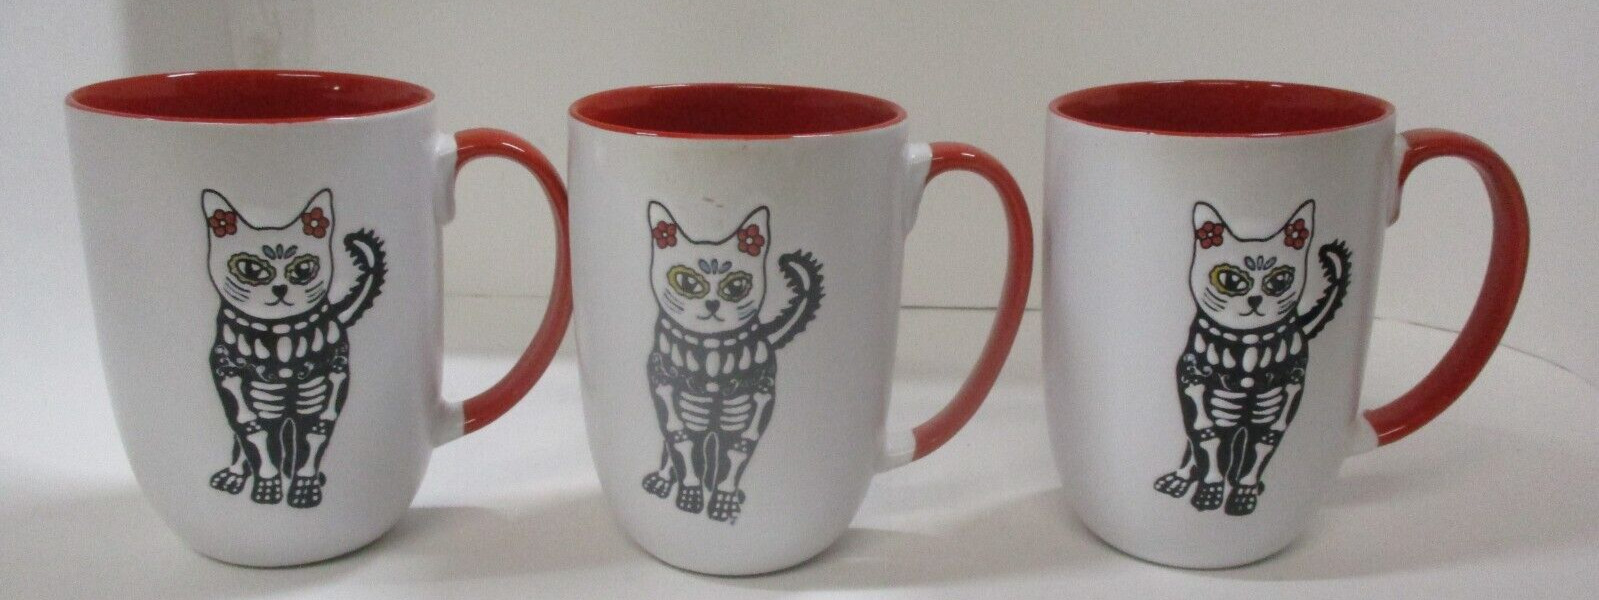 3 Day Of The Dead Cat Skeleton Ceramic Coffee Mugs Red Black White